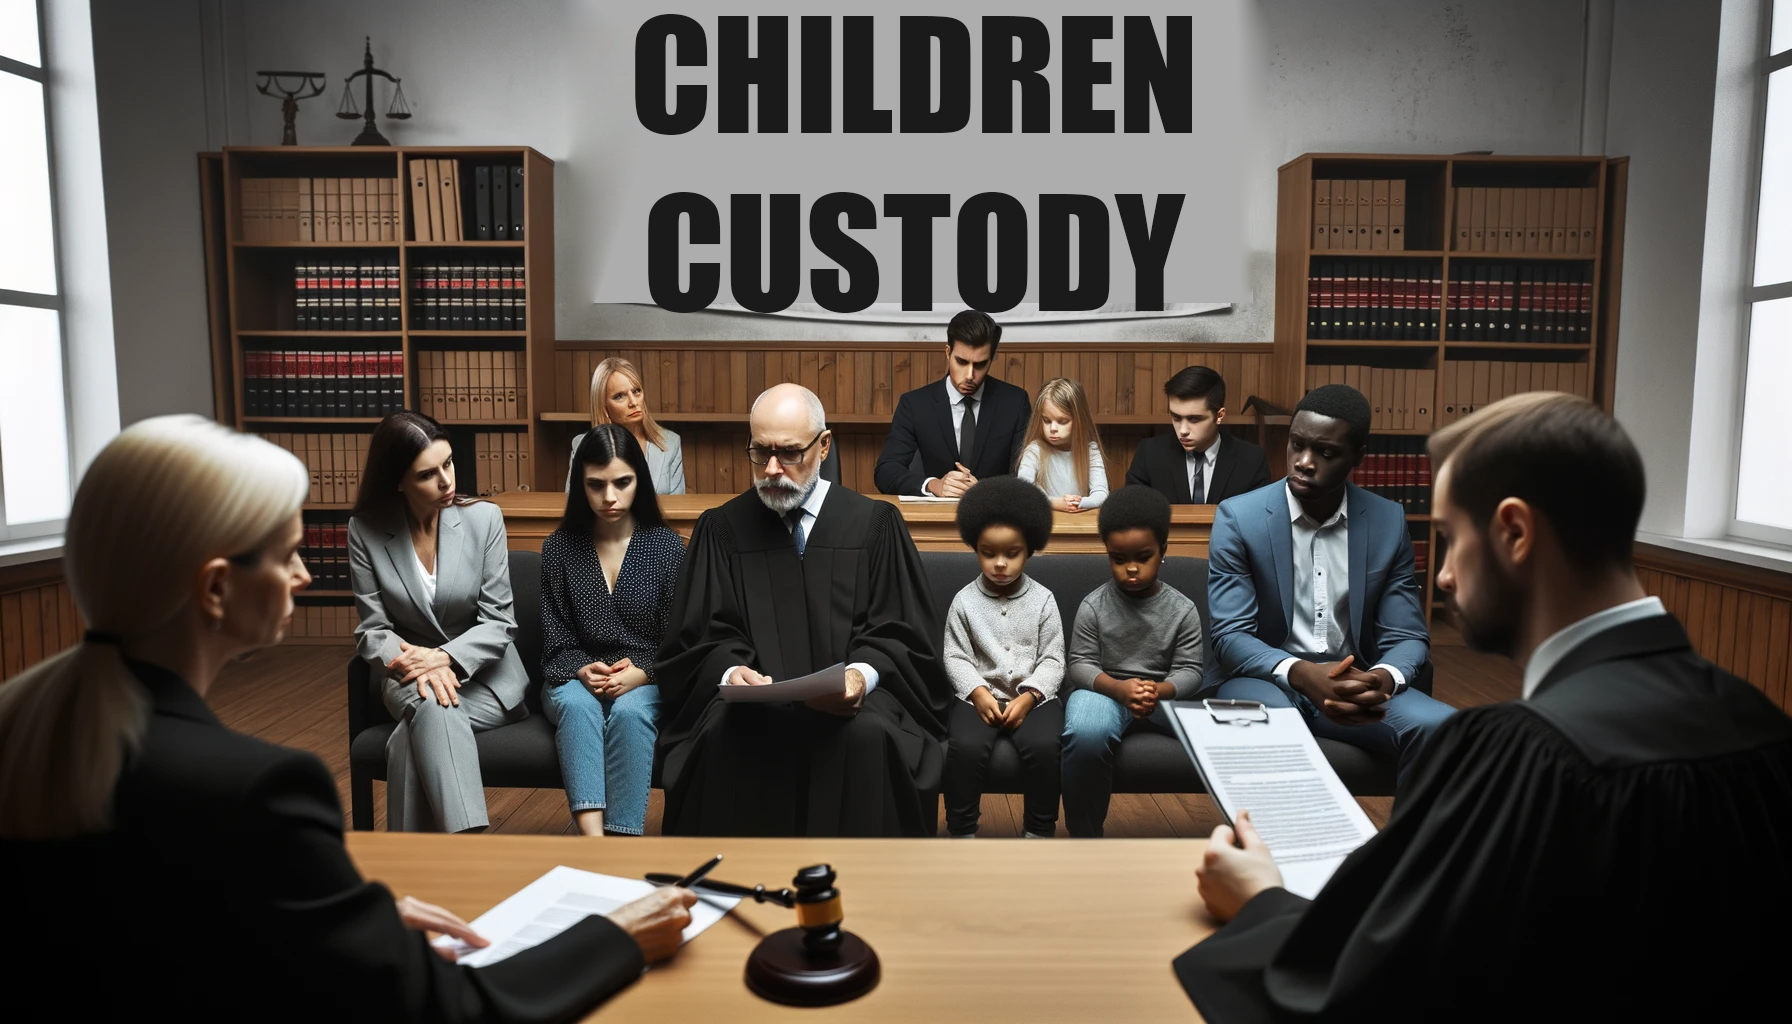 Different Types of Child Custody – Overview